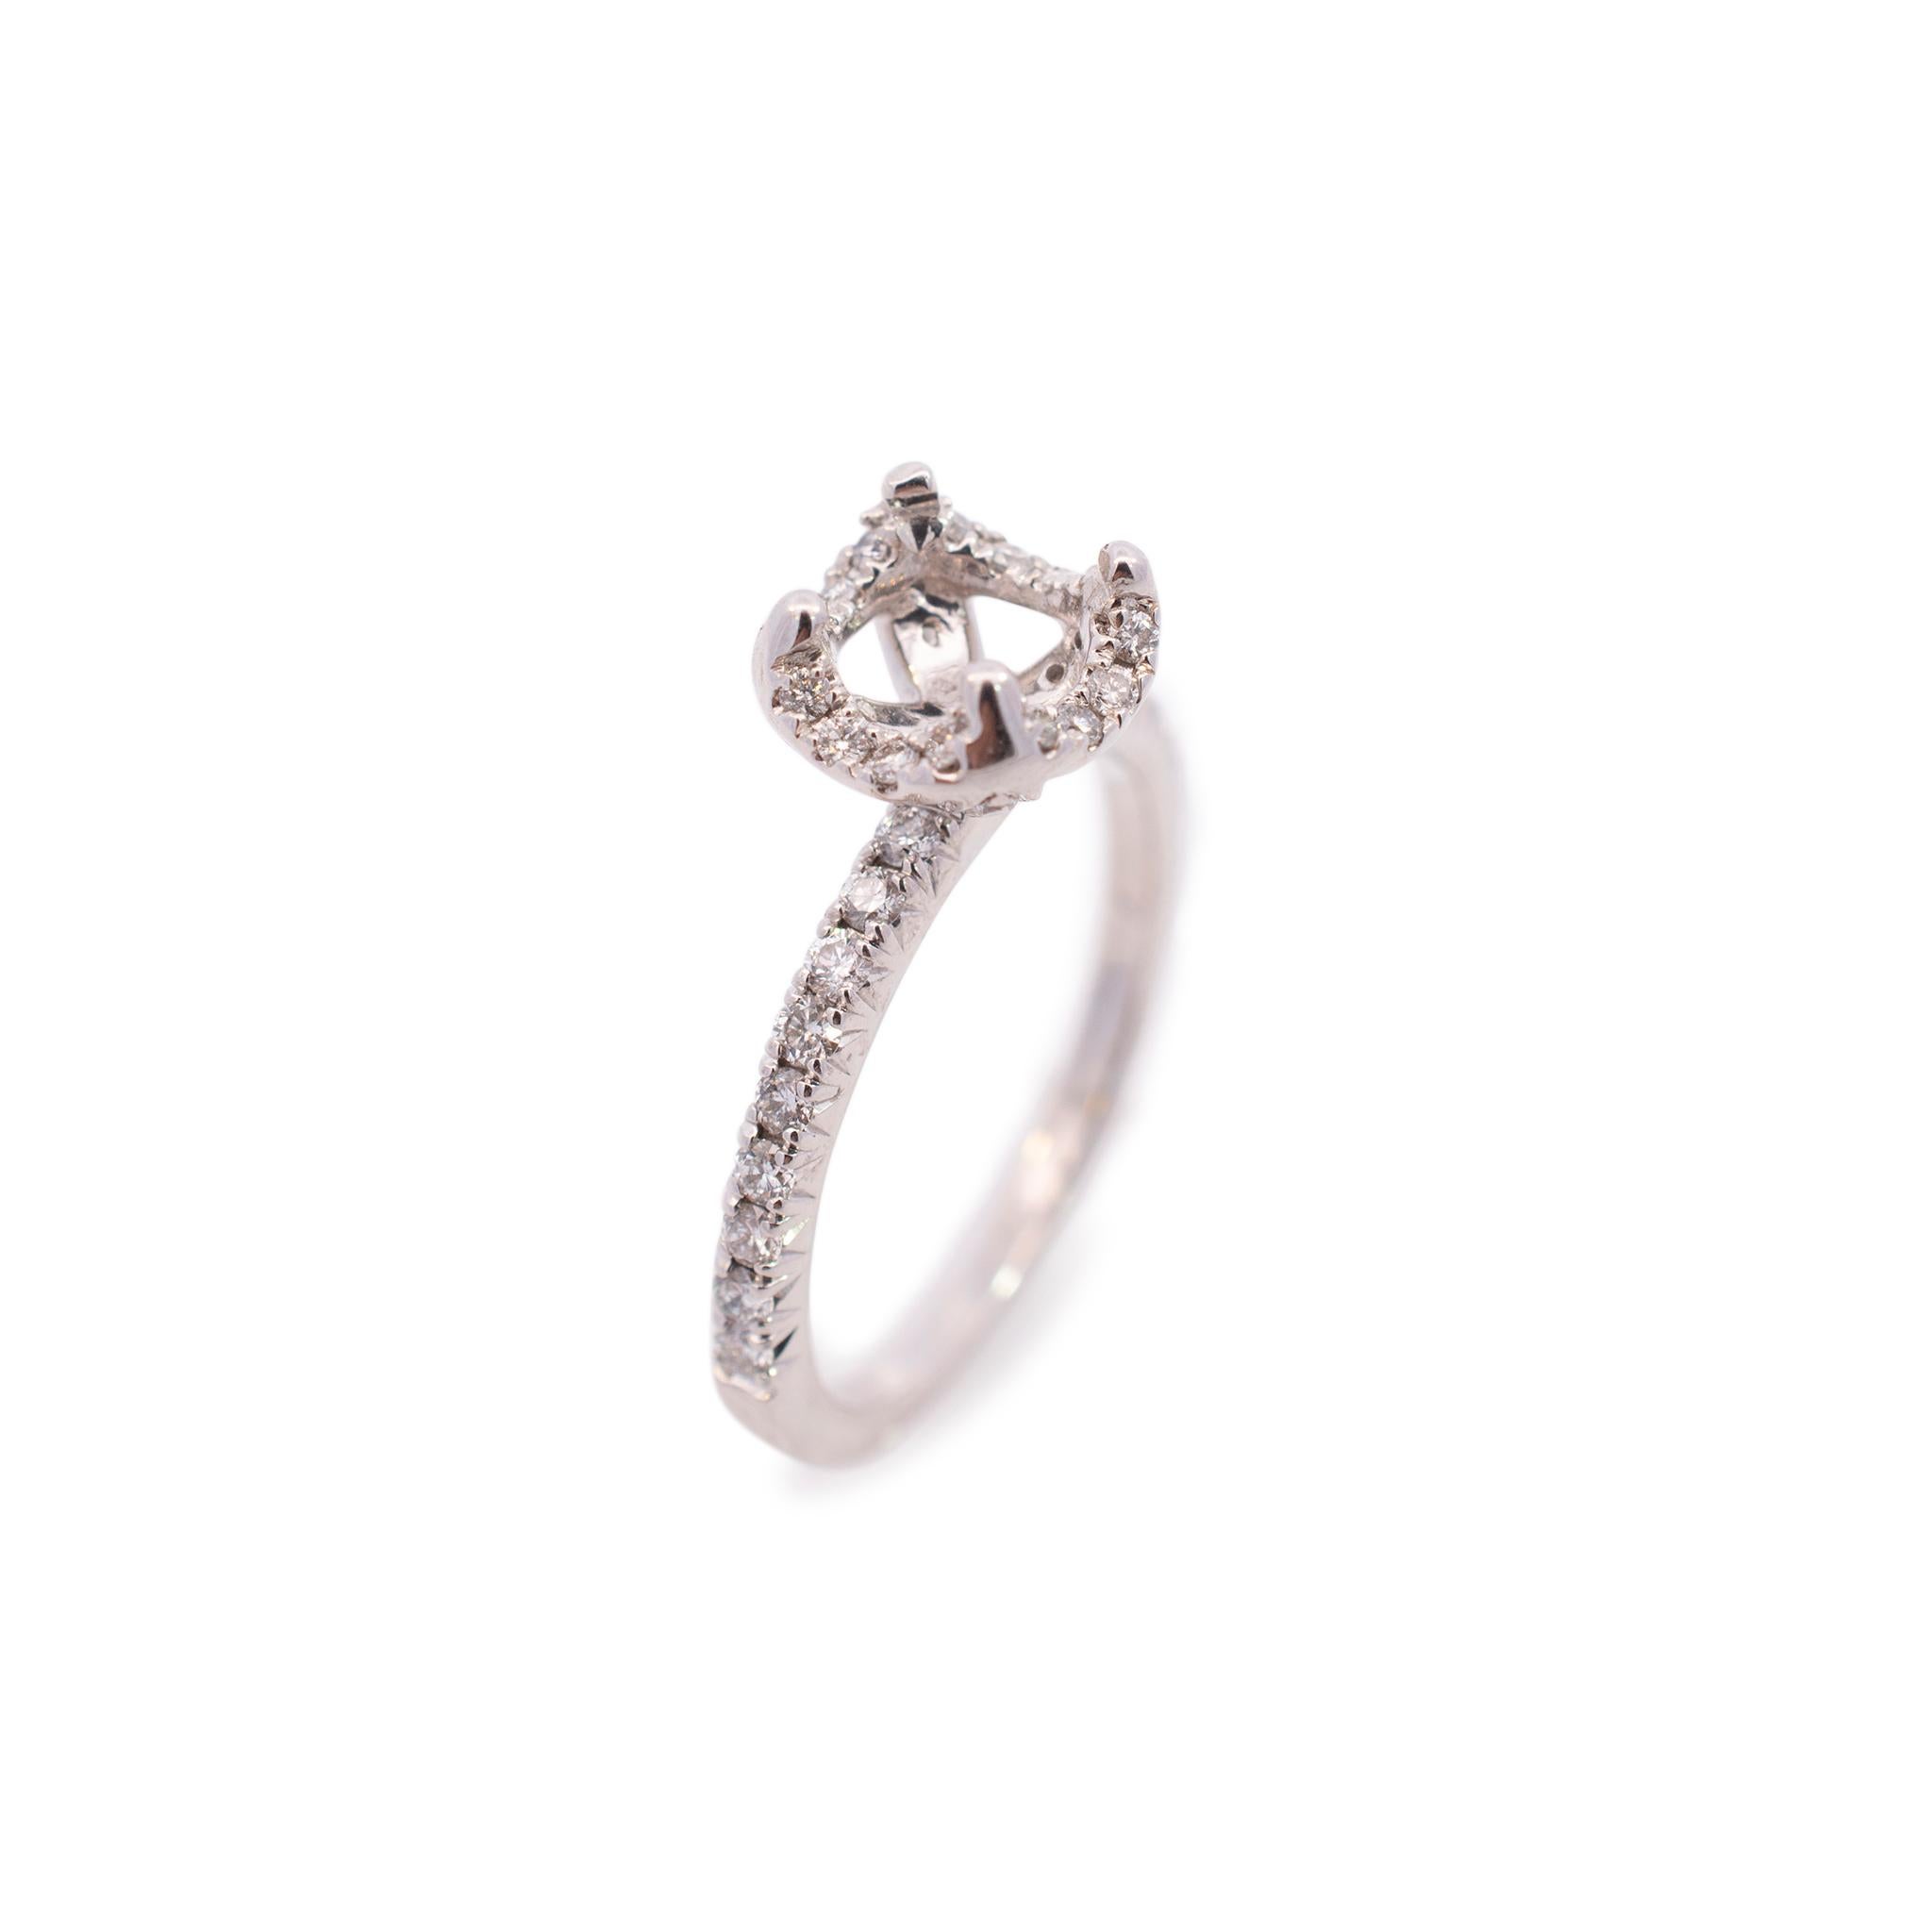 Ladies custom-made polished rhodium plated 14K white gold, diamond engagement, semi-mount, halo ring with a half-round shank. The ring is size 6 and measures approximately 8.35mm tapering to 1.55mm in width and weighs a total of 2.86 grams. Engraved